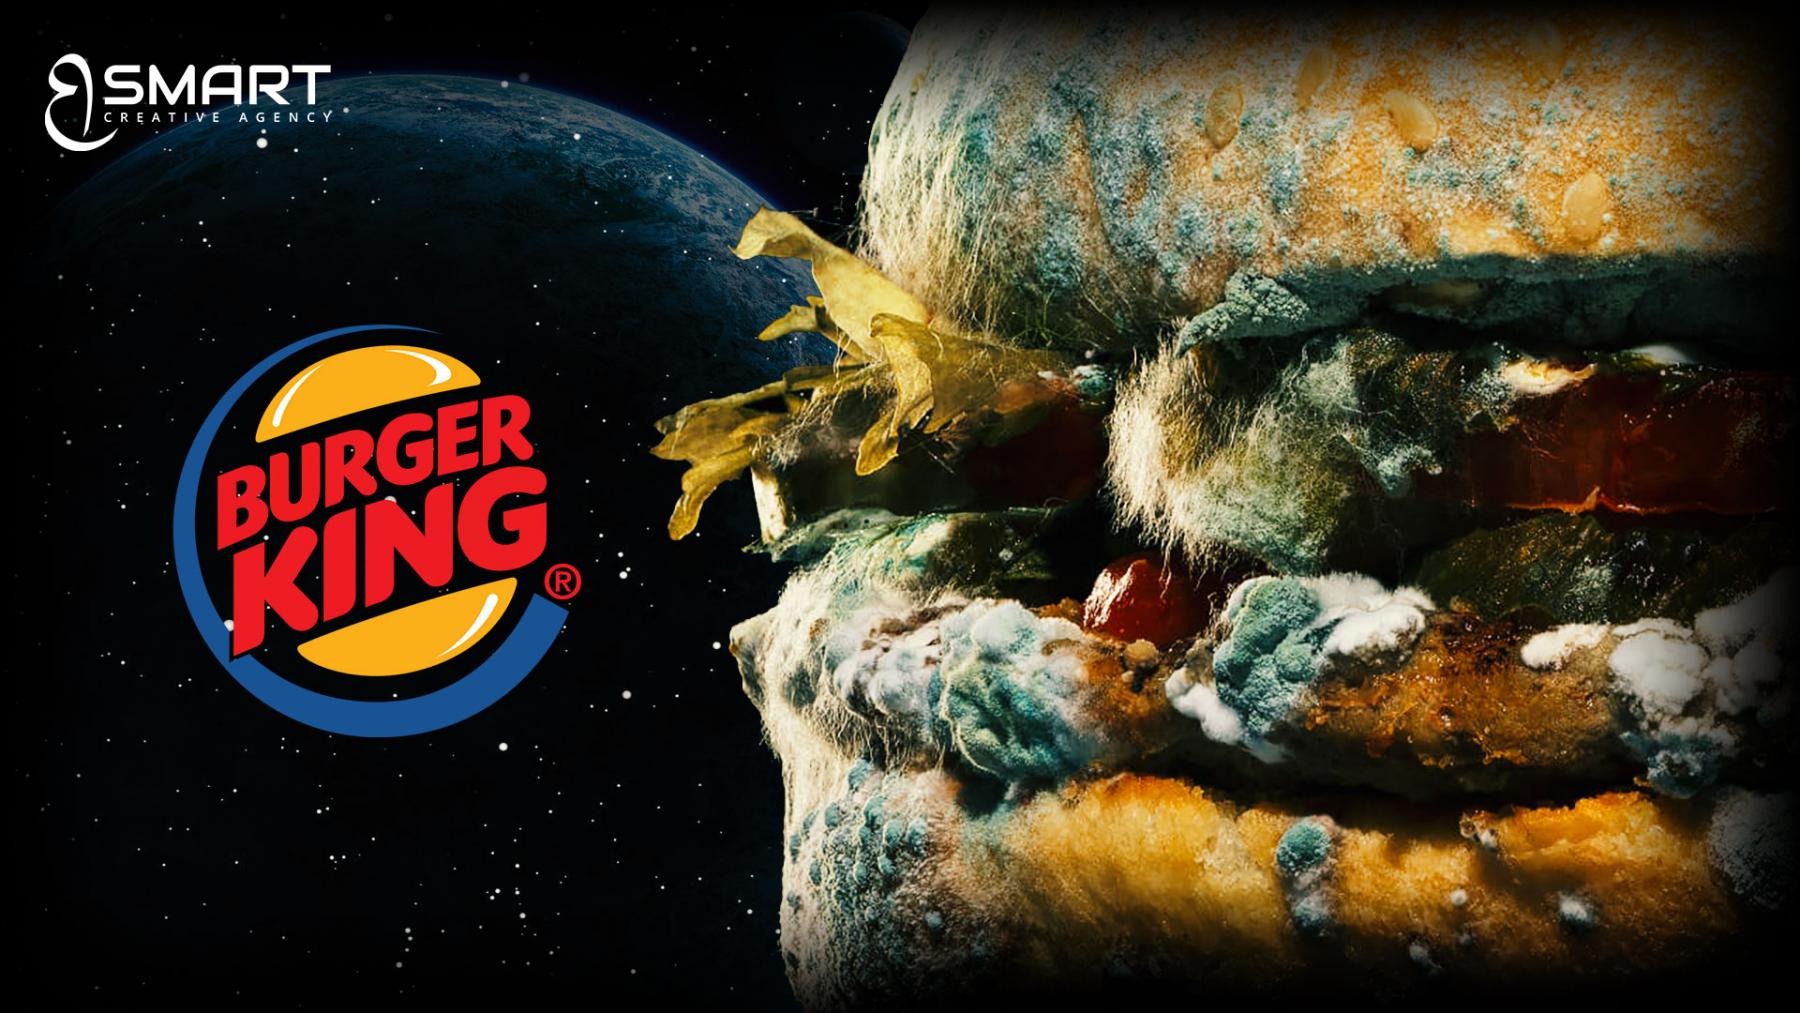 Burger king “Moldy whopper” campaign breaks the usual stereotype.